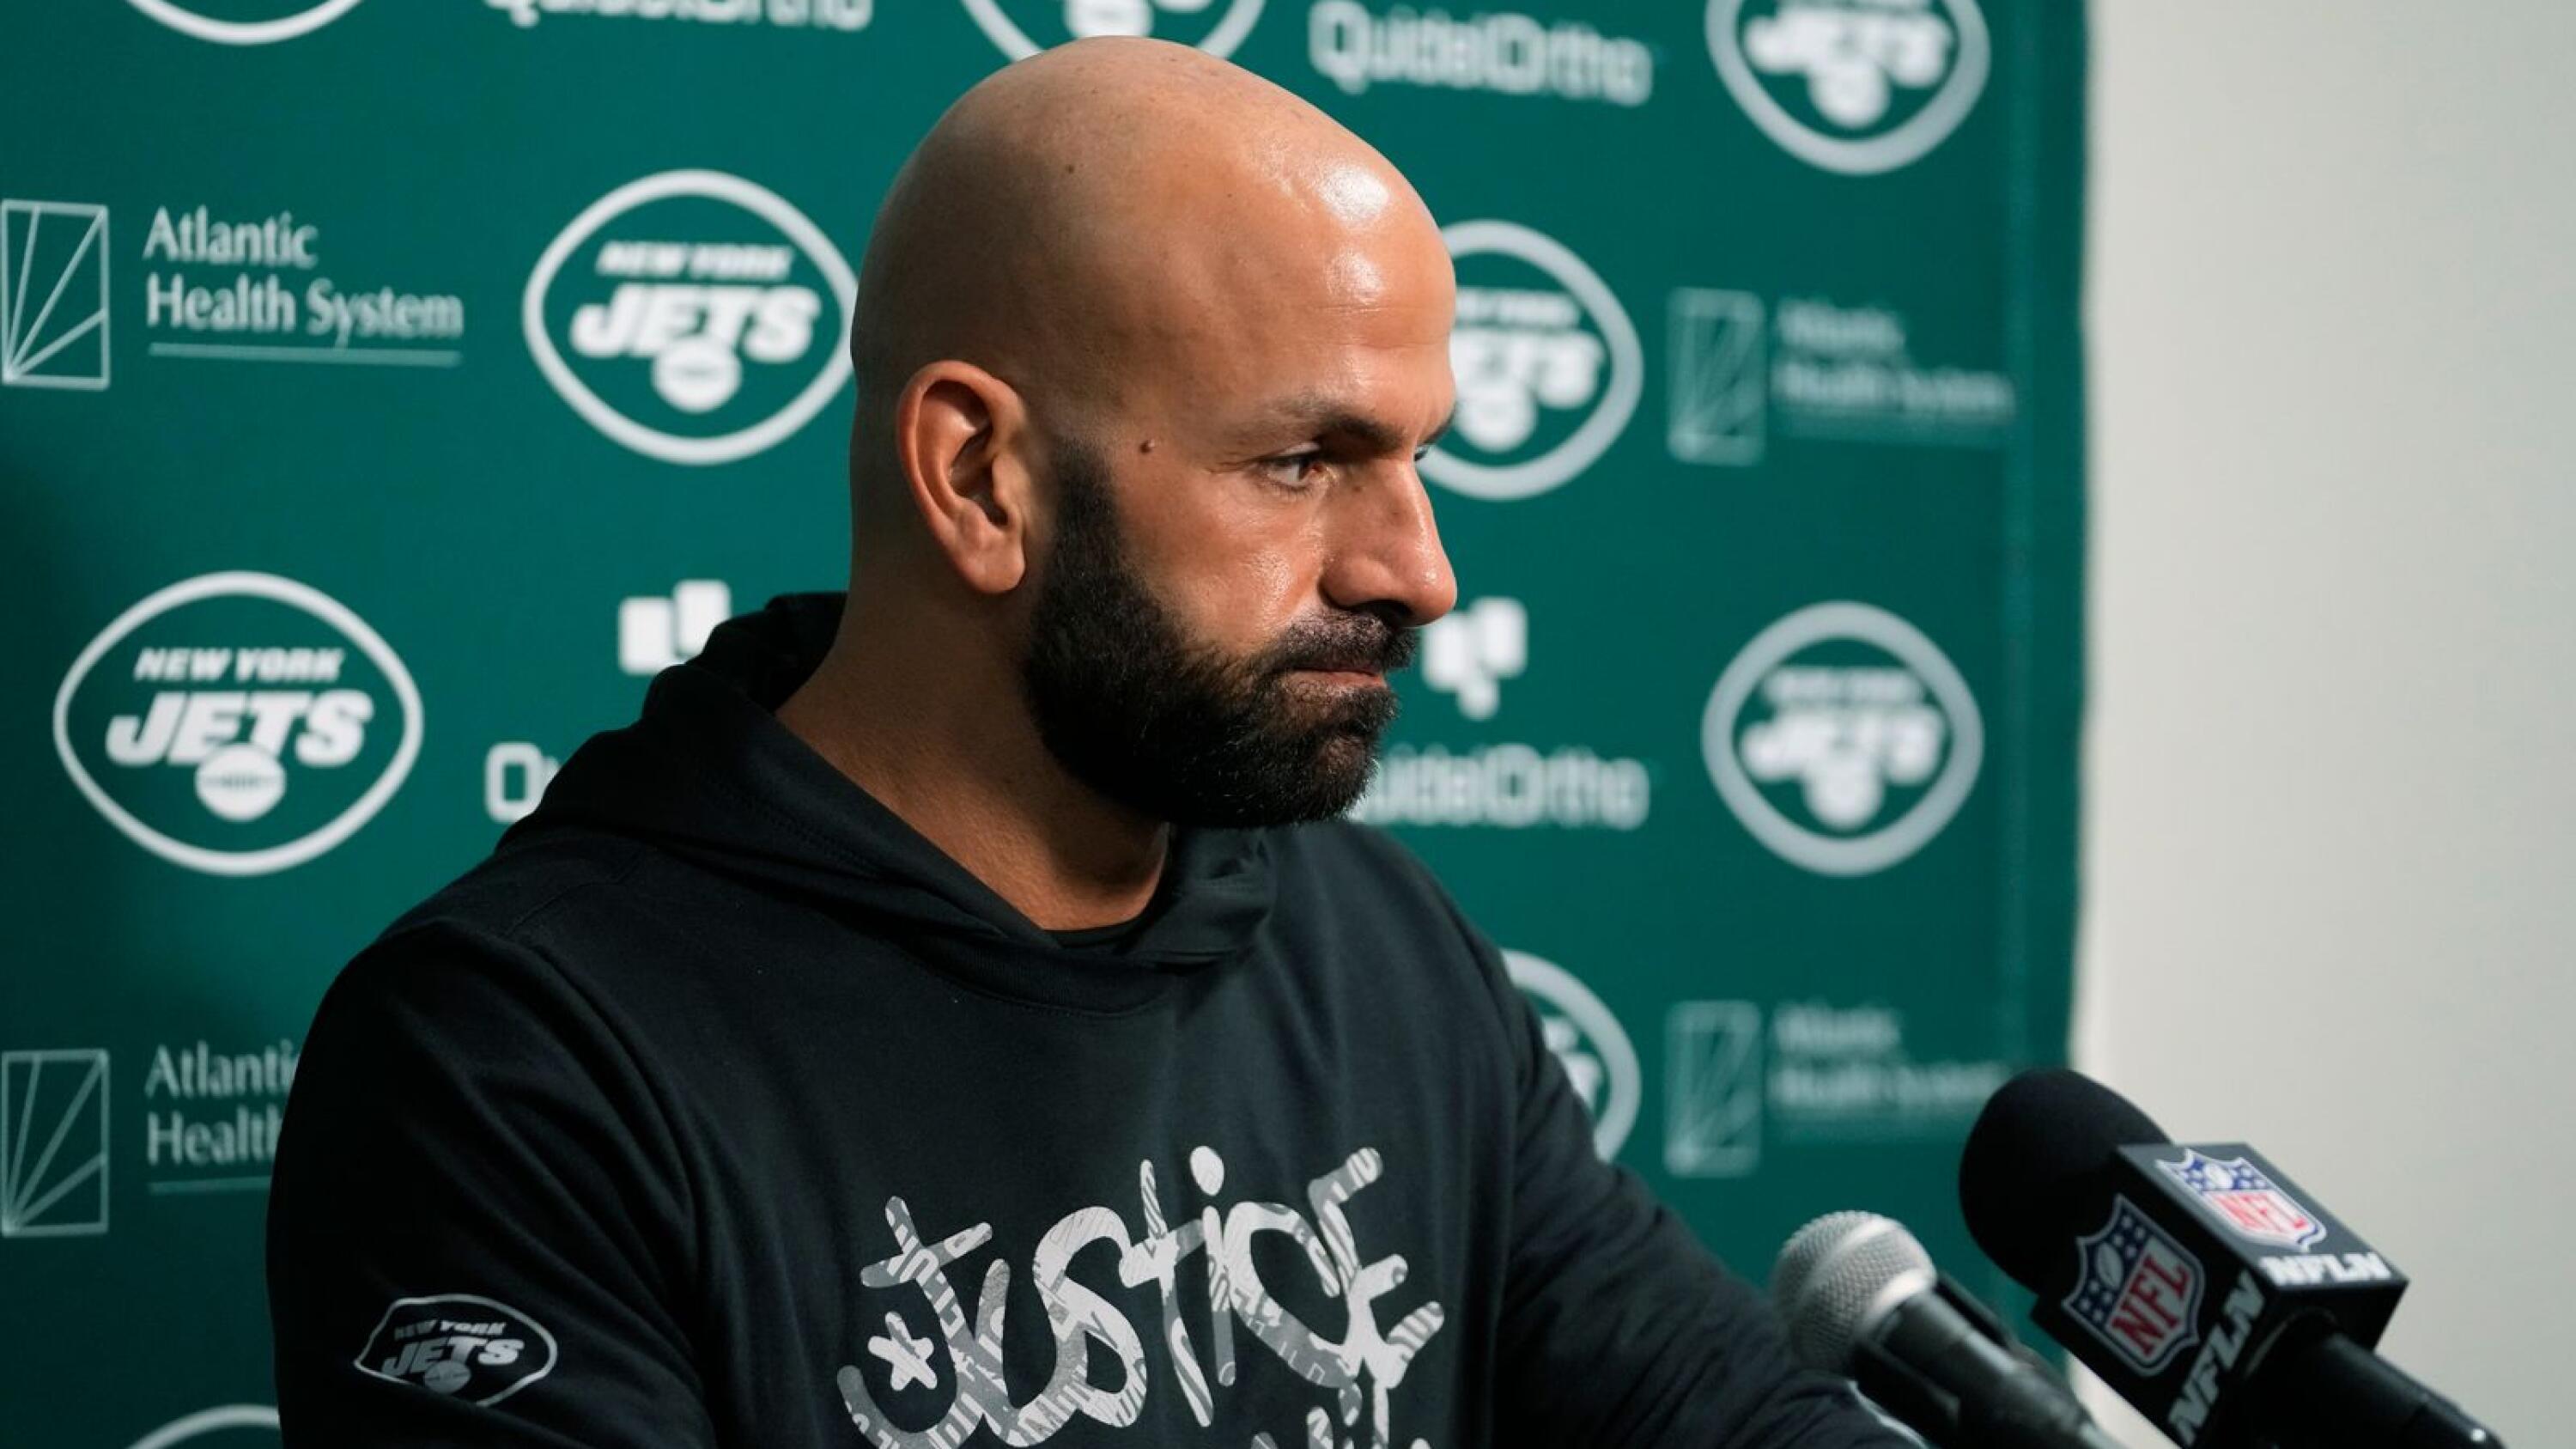 Seats are getting hotter for Jets coach Robert Saleh and GM Joe Douglas  after embarrassing loss